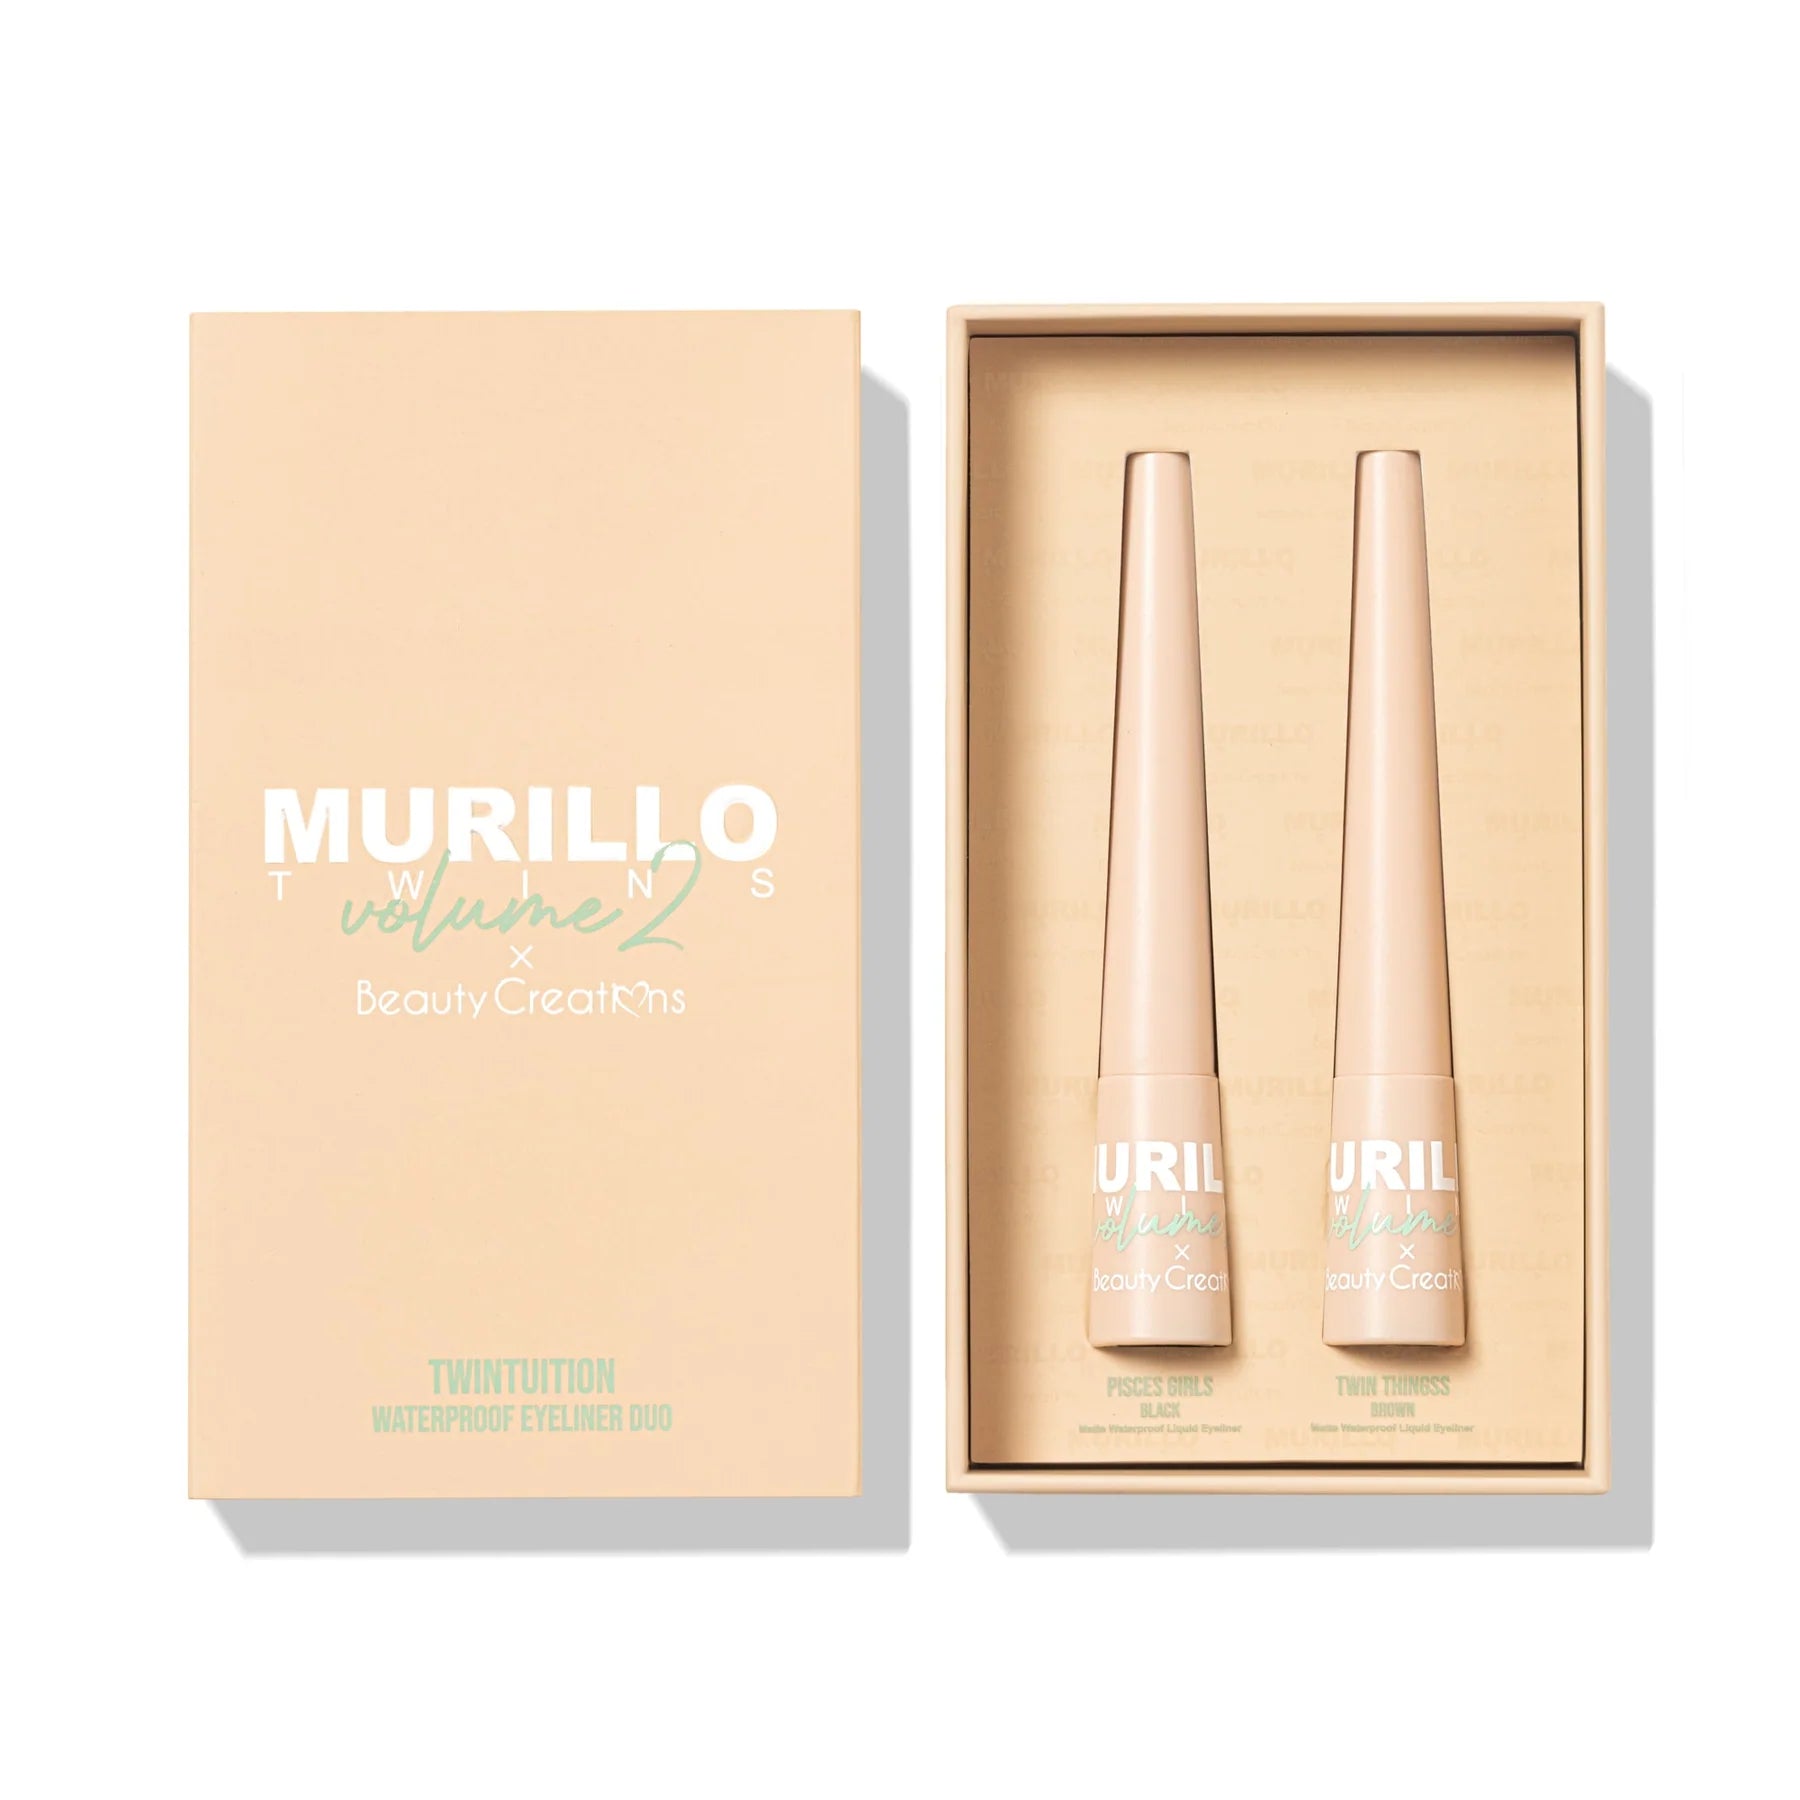 Beauty Creations - Murillo Twins Vol. 2 Twintution Eyeliners